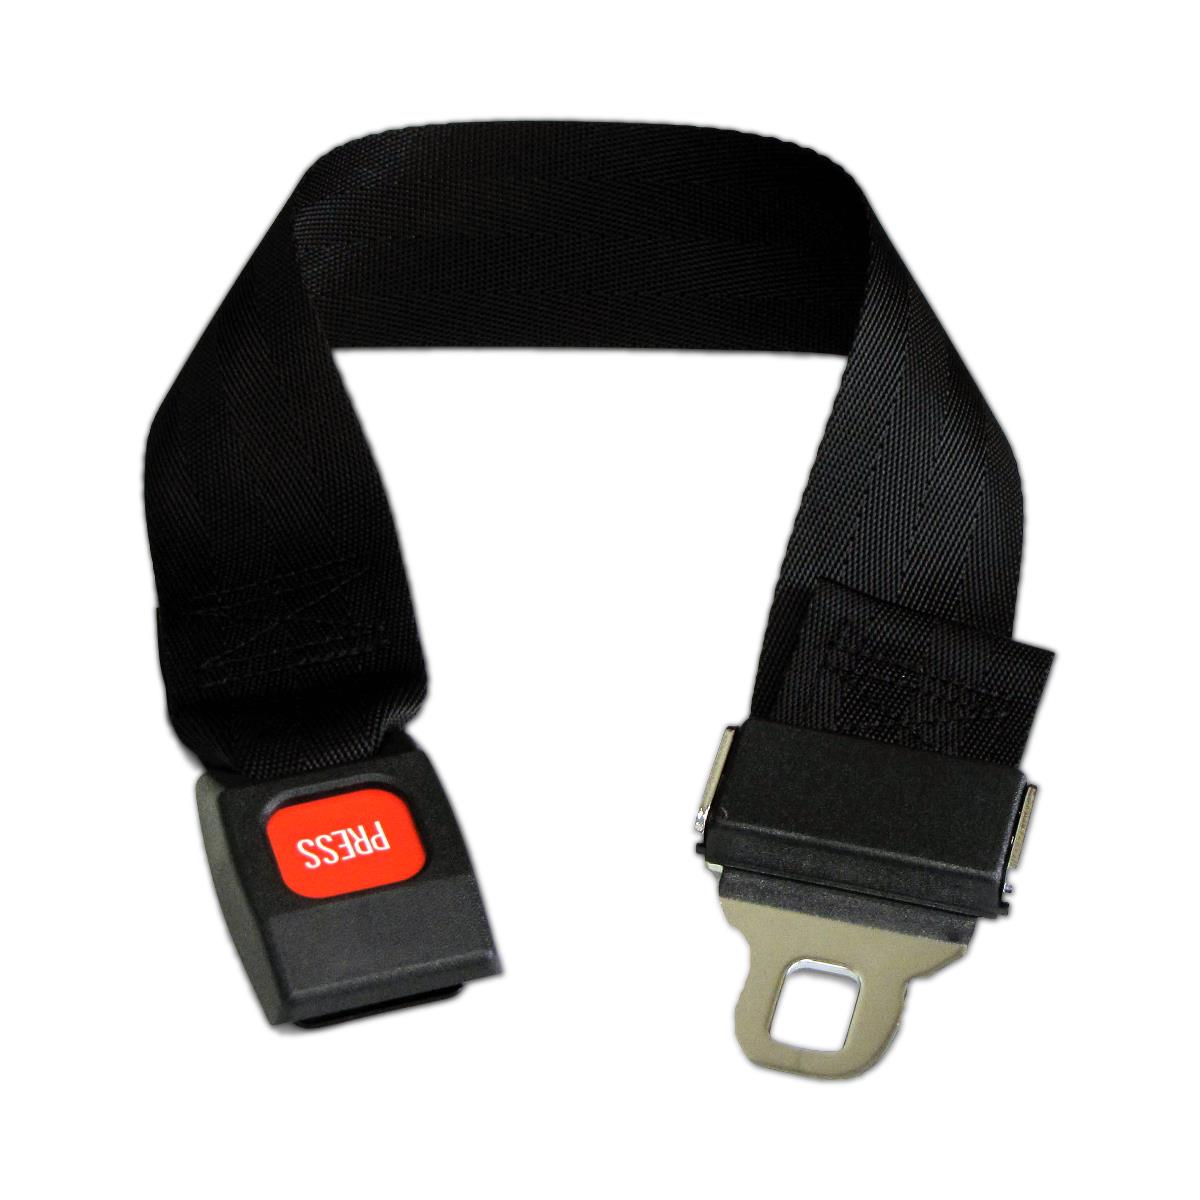 5 Foot - 2 Piece Nylon Stretcher Strap with Metal Buckle